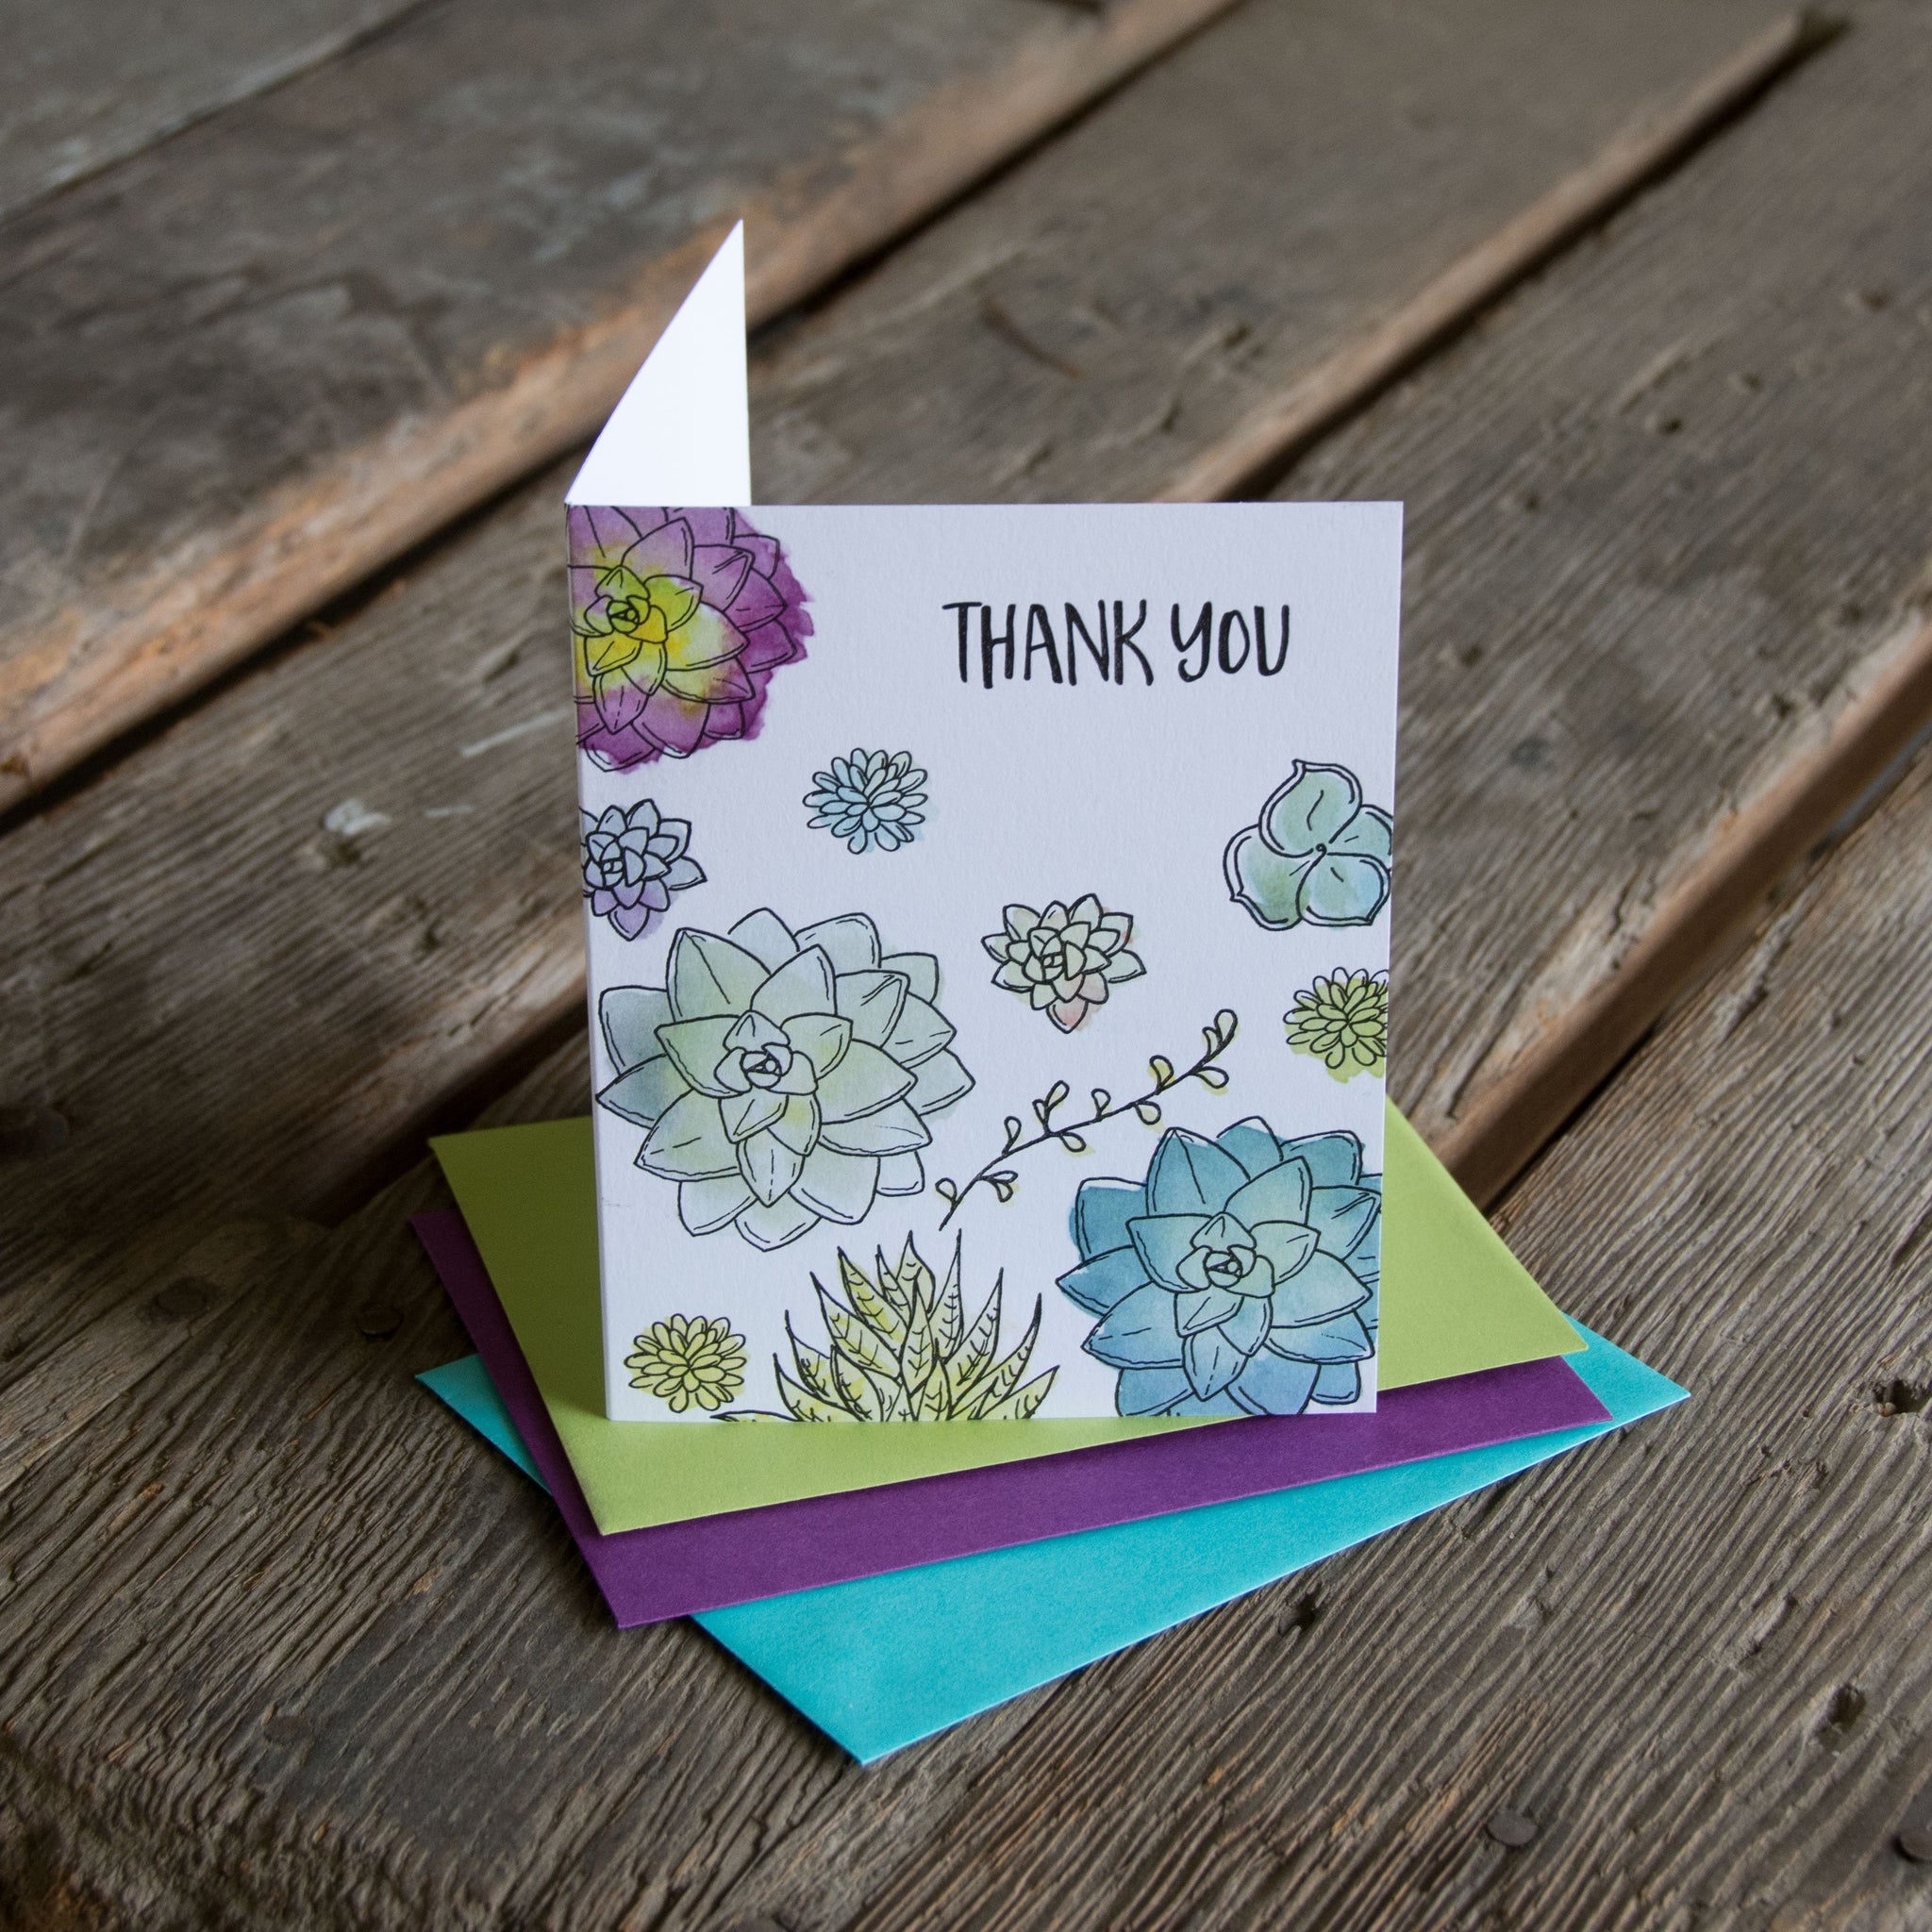 Thank you succulent card, letterpress printed card. Eco friendly